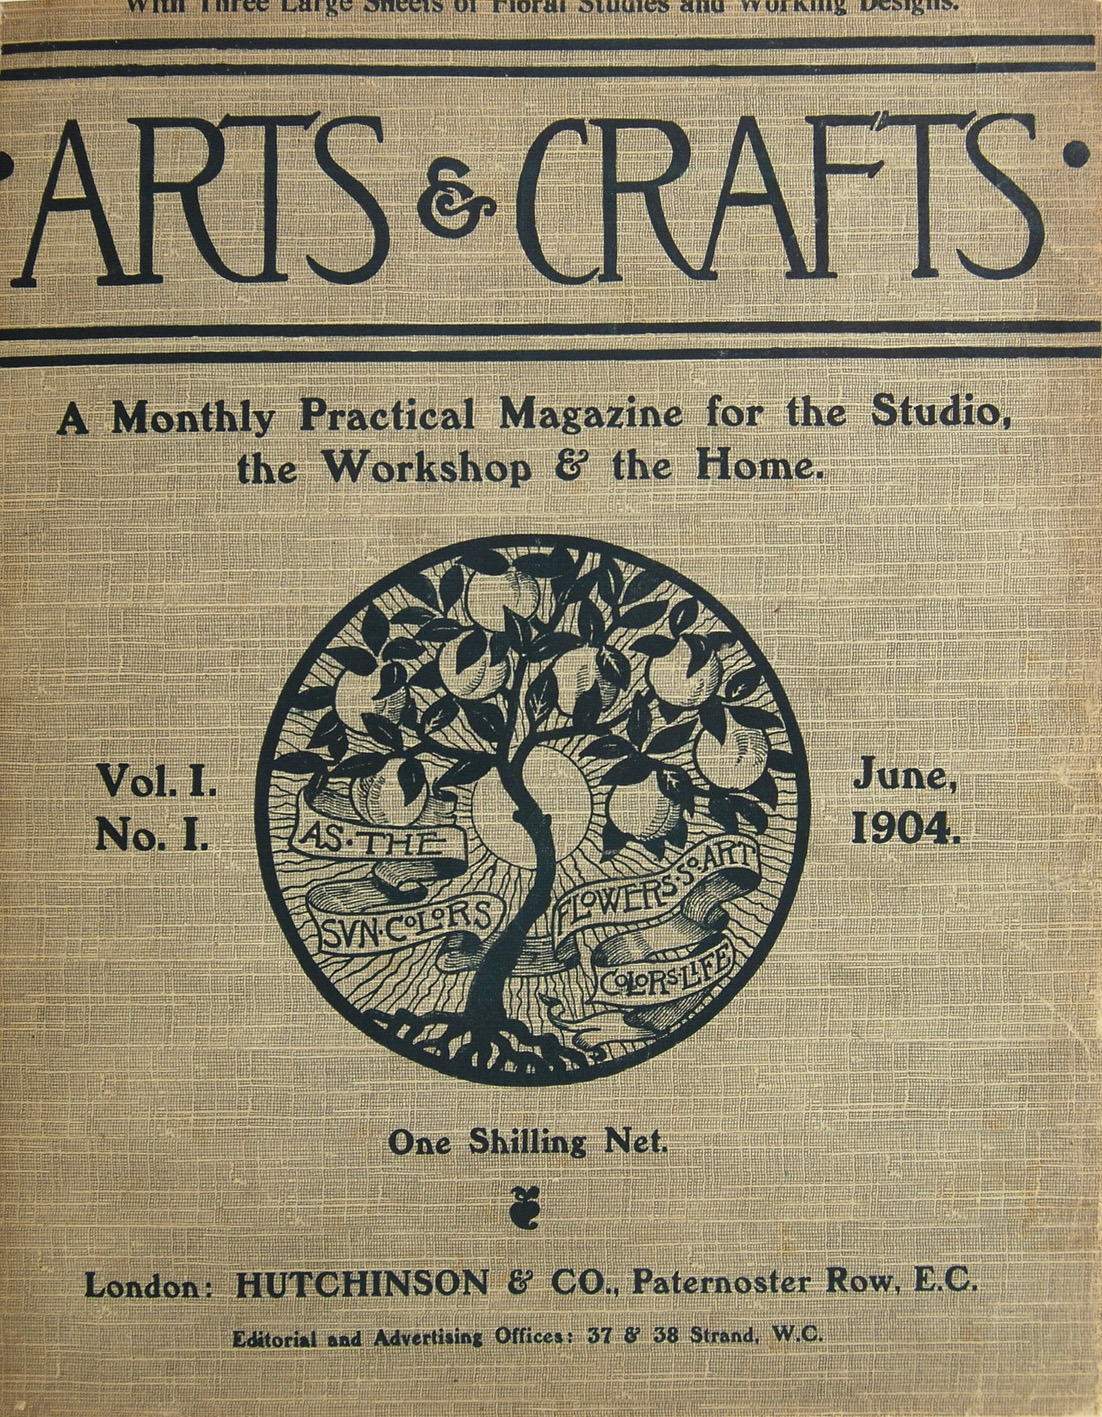 A Practical Guide to Arts & Crafts and Art Nouveau - First Editions Book  Blog